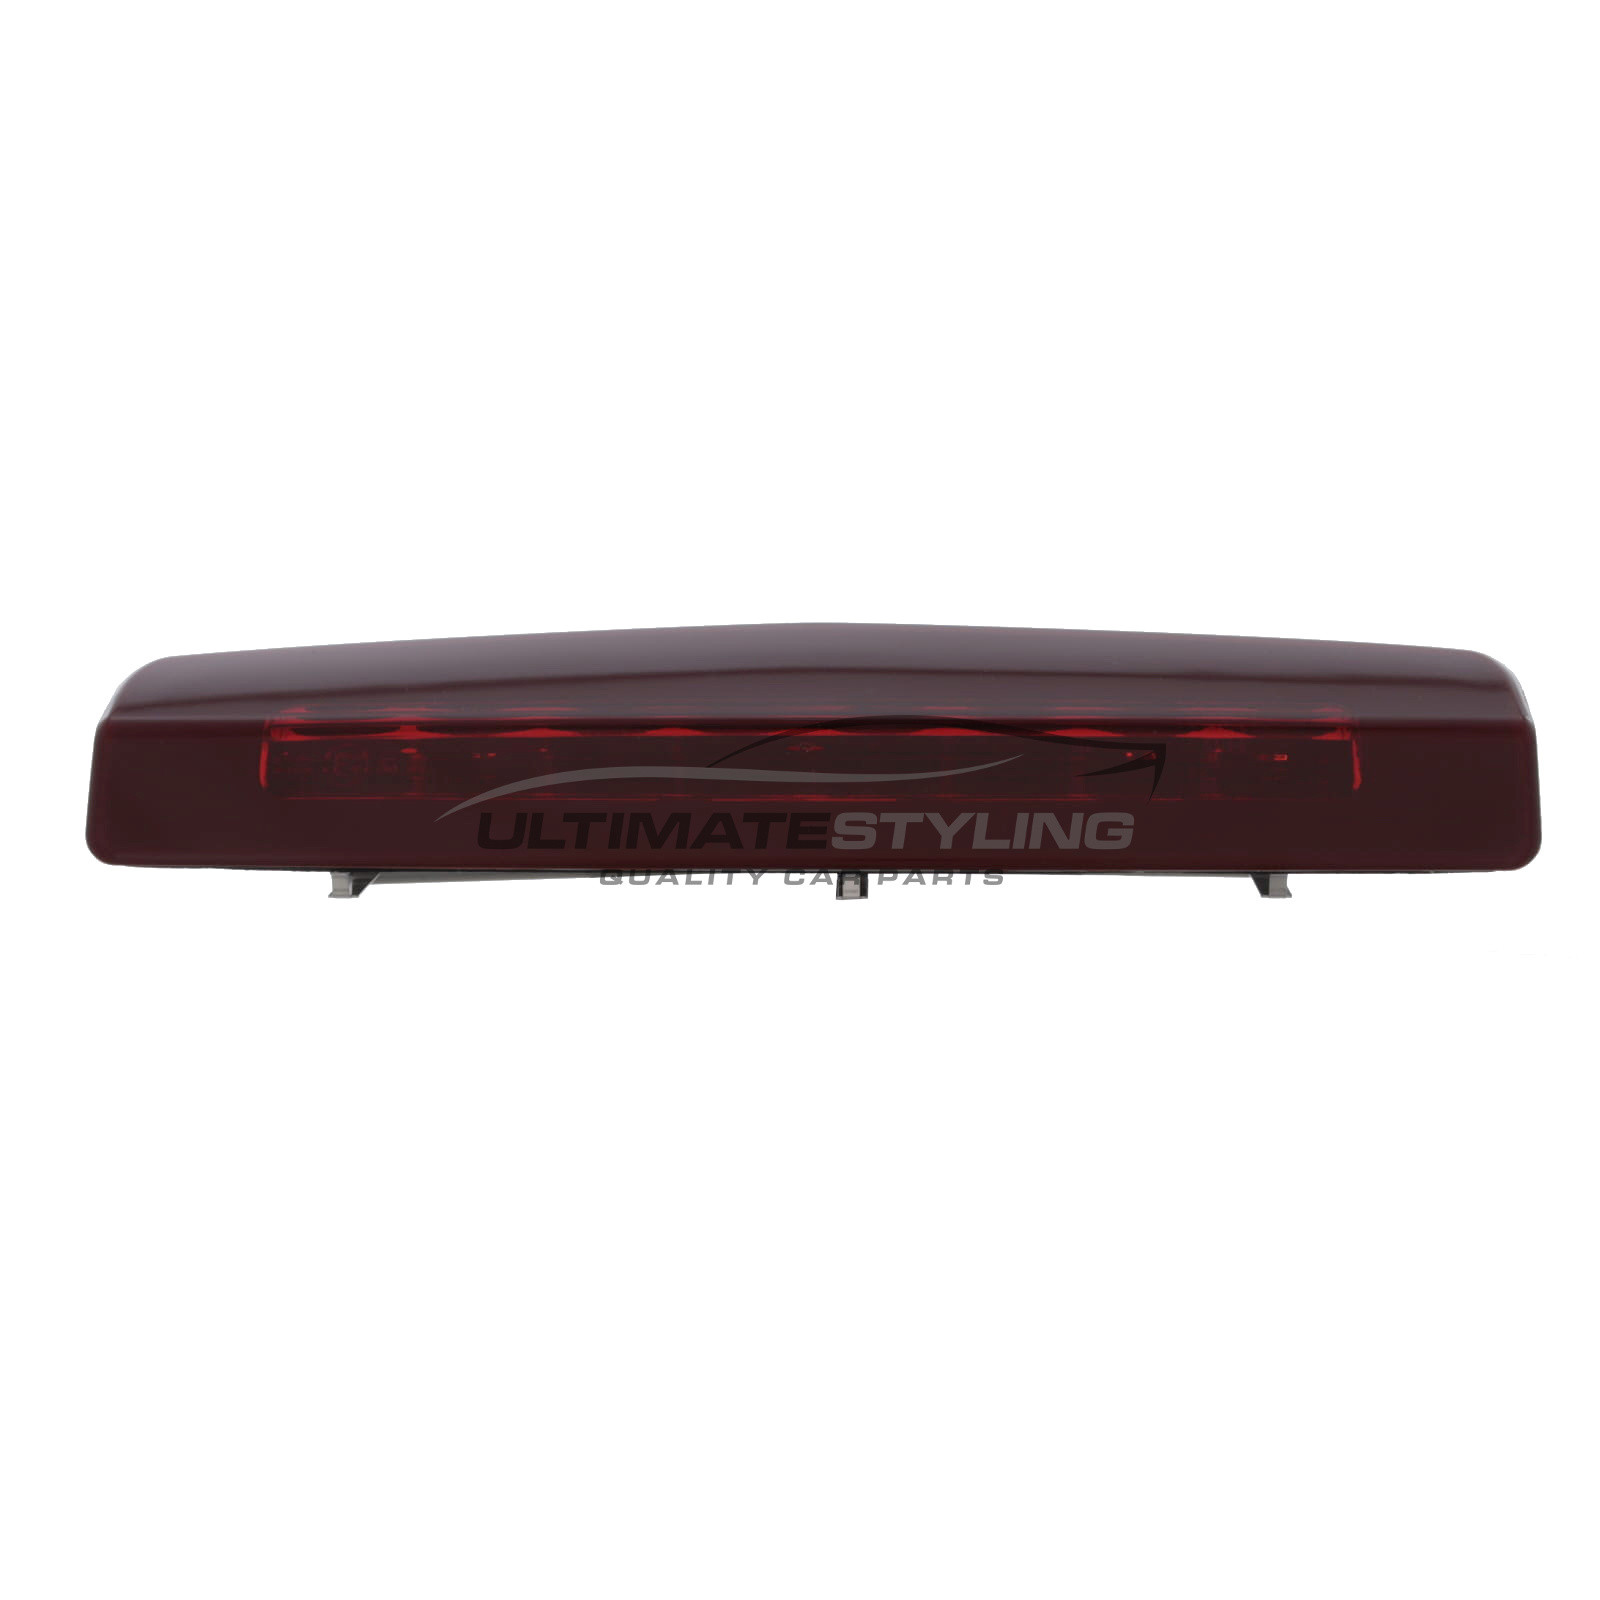 Vauxhall Astra / Zafira Rear - Third Brake Light - Top Of Tailgate (Central), Rear Centre Top Of Tailgate - LED